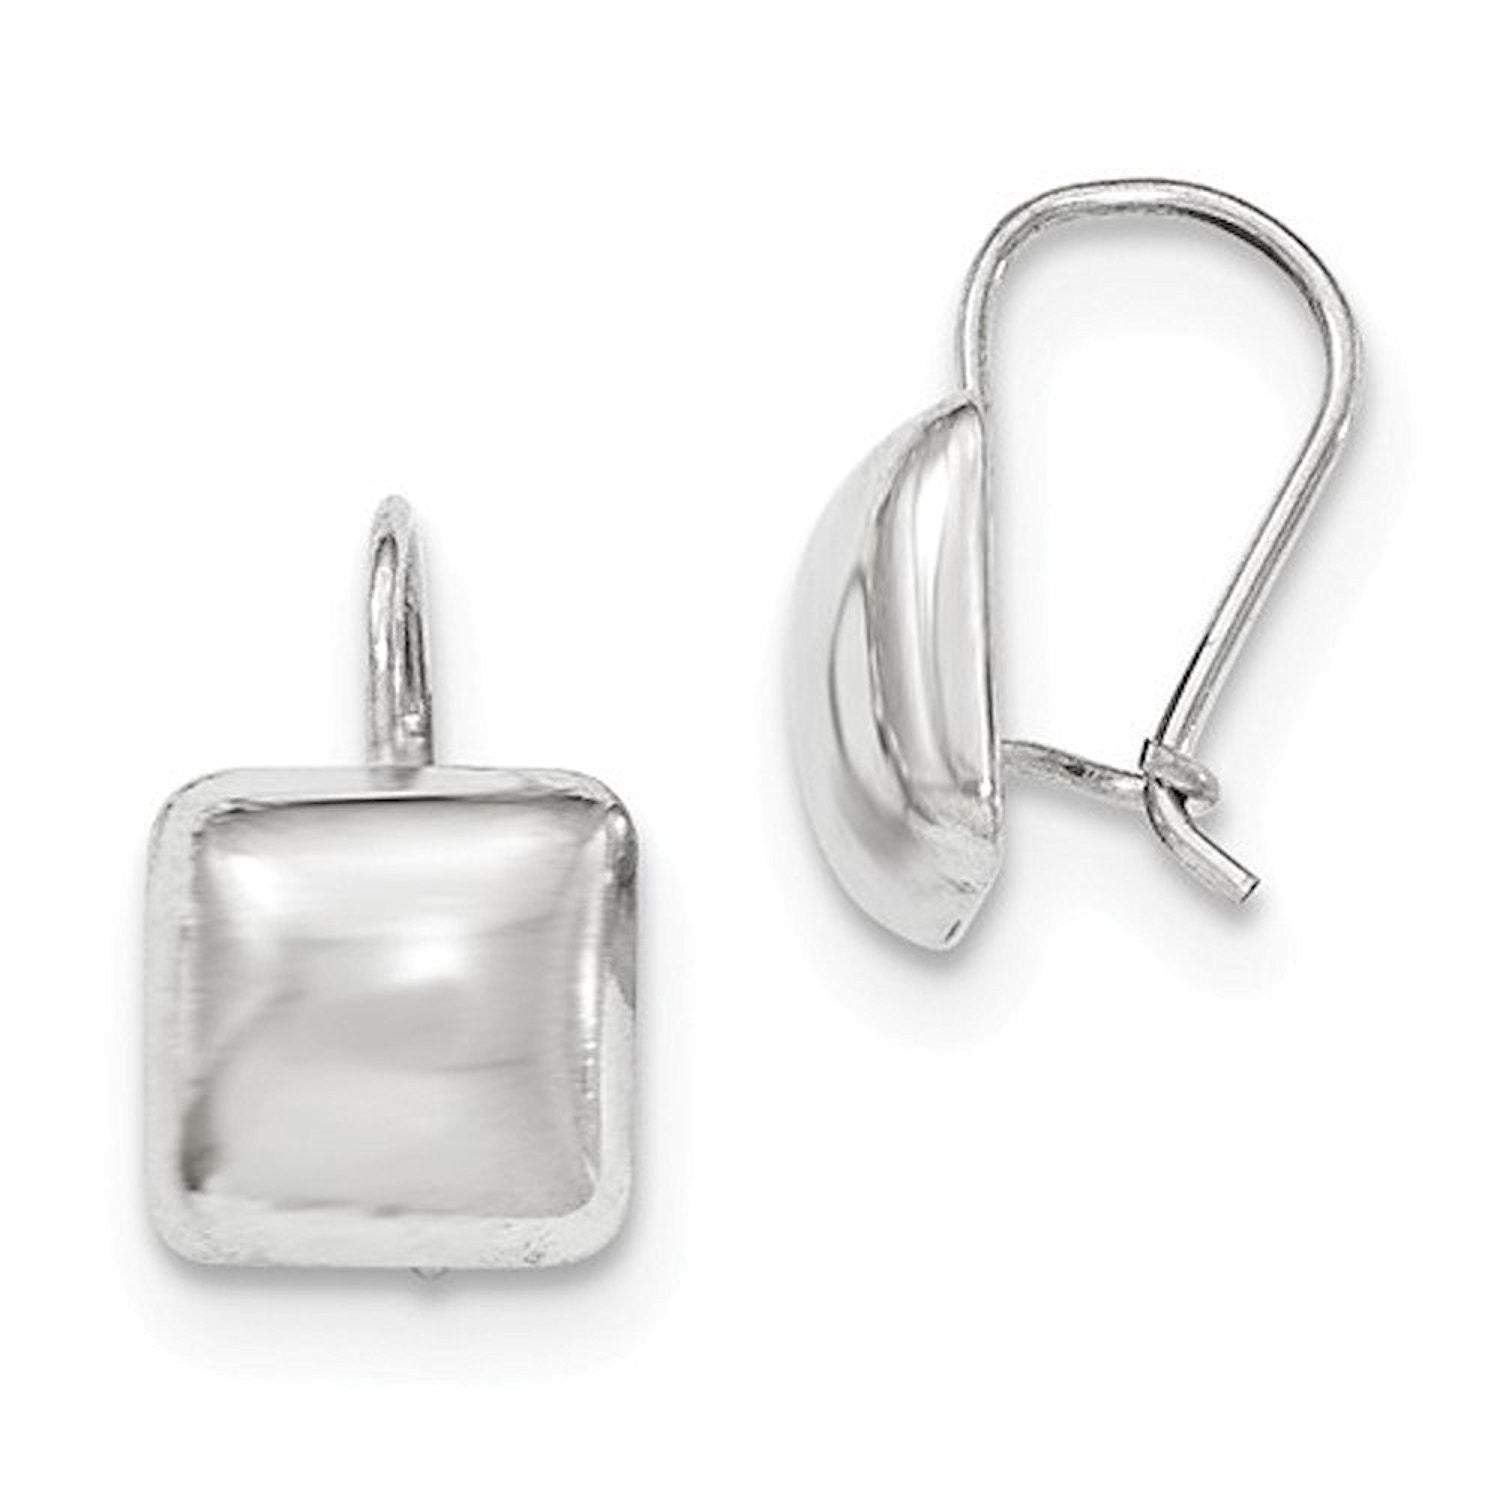 14k White Gold Square Button 10mm Kidney Wire Button Earrings